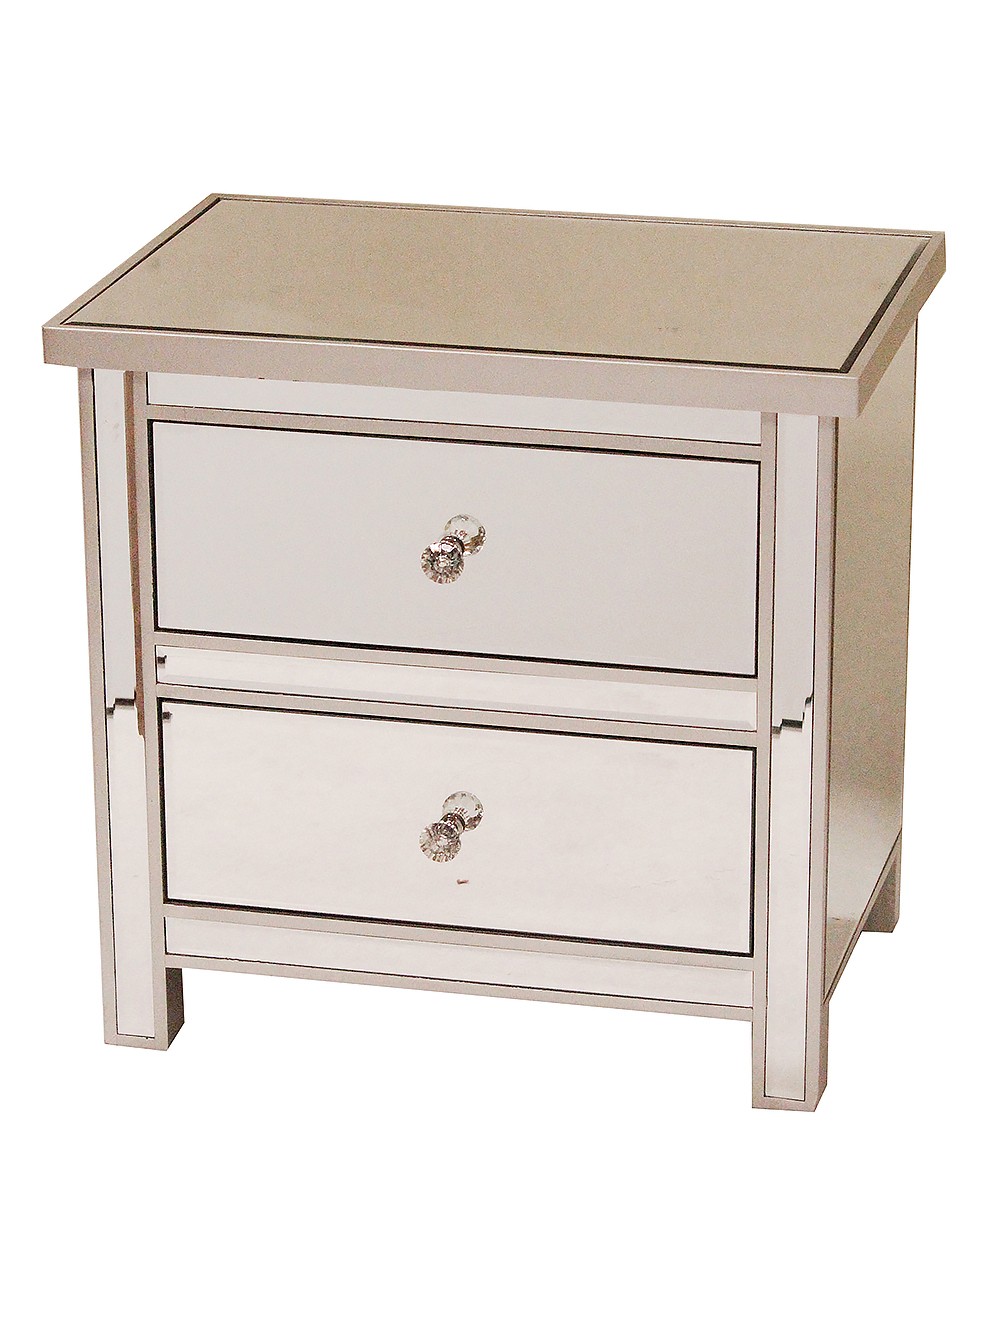 23" X 15.75" X 22" Silver MDF Wood Mirrored Glass Accent Cabinet with Mirrored Drawers